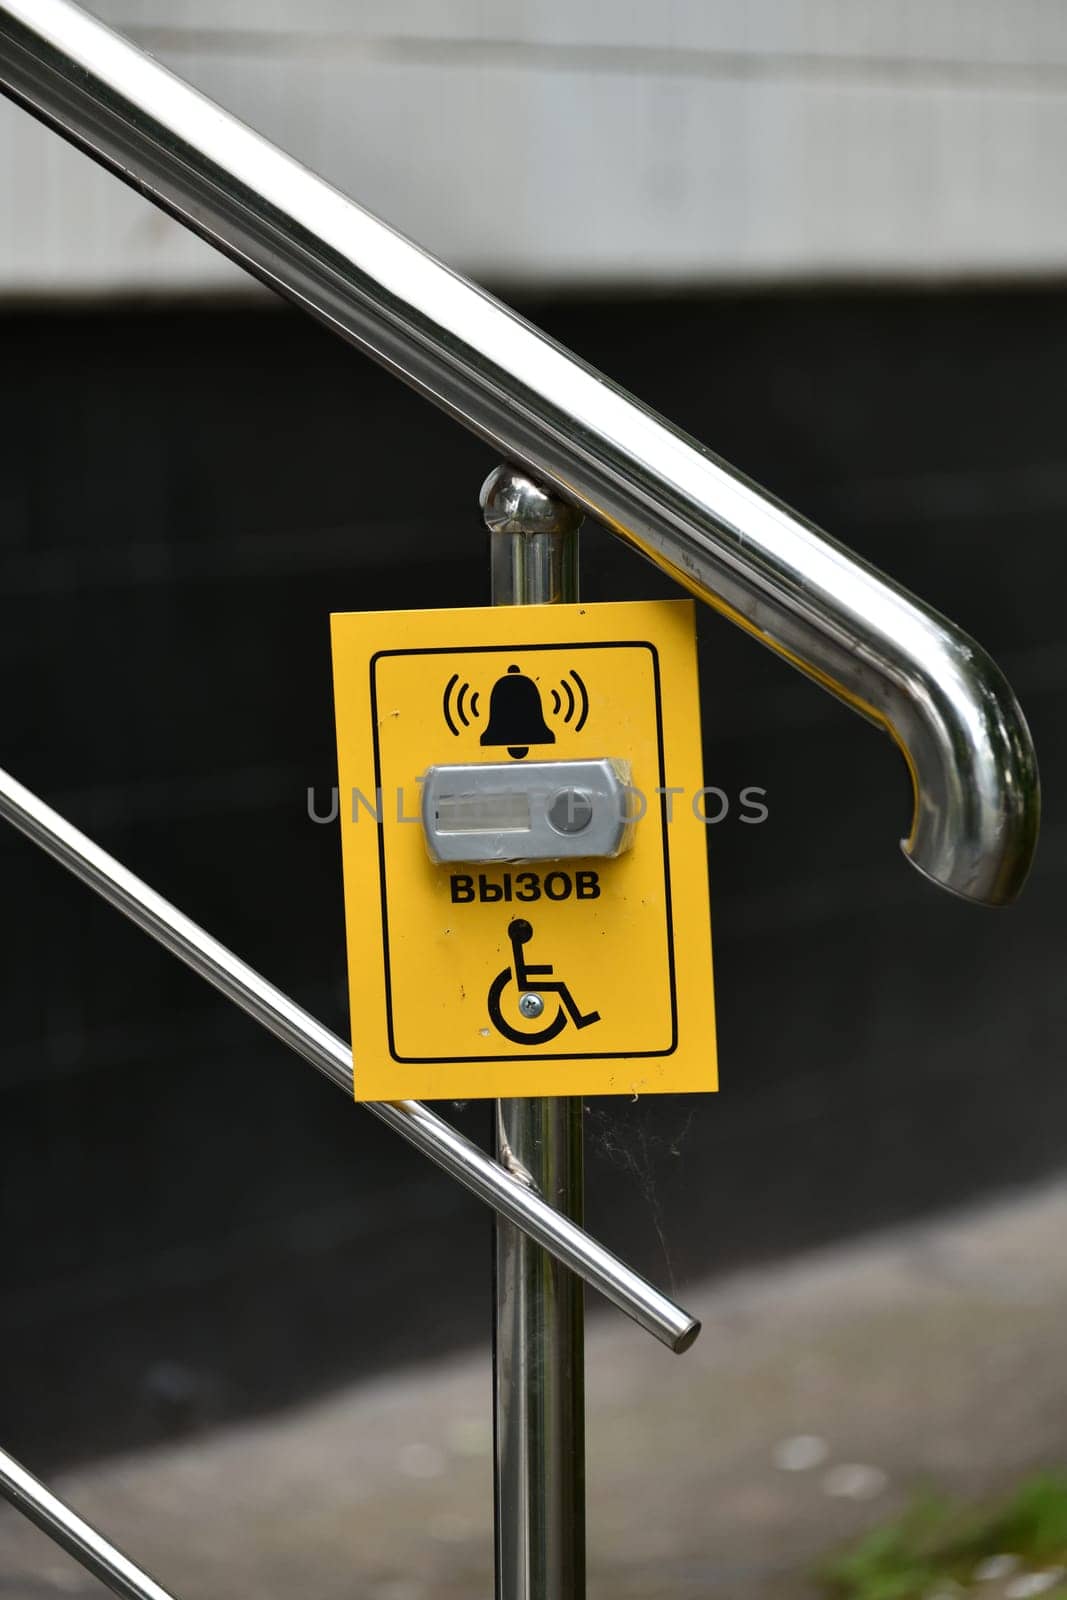 Button for calling help for the disabled on the handrail of the stairs